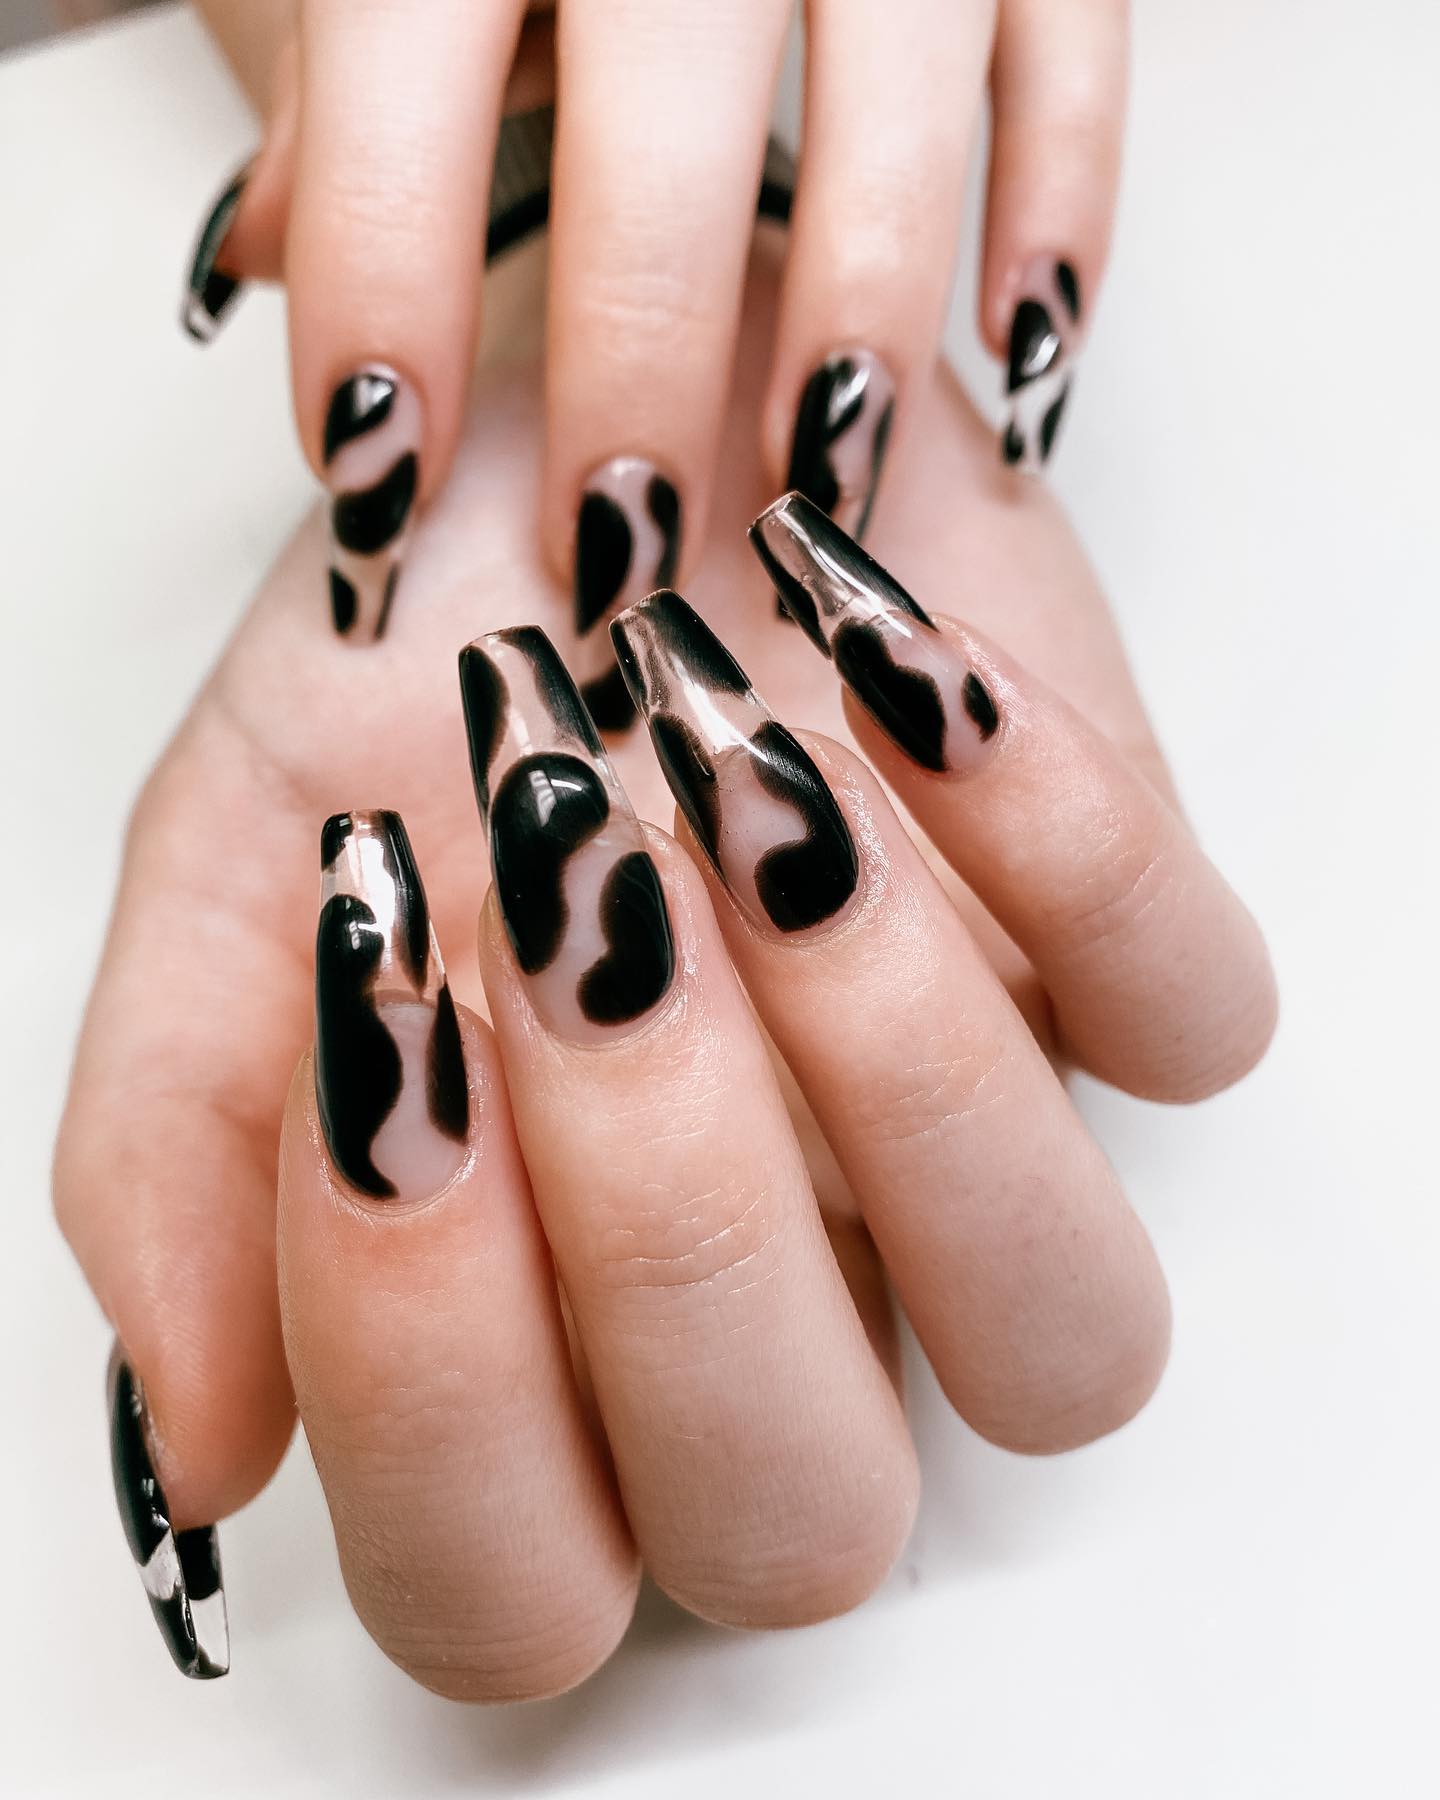 Long ballerina gel nails are the best manicure because they last a long time and are shiny. If you wanna achieve an elegant look, you can apply some random black cow prints on your transparent gel nails.